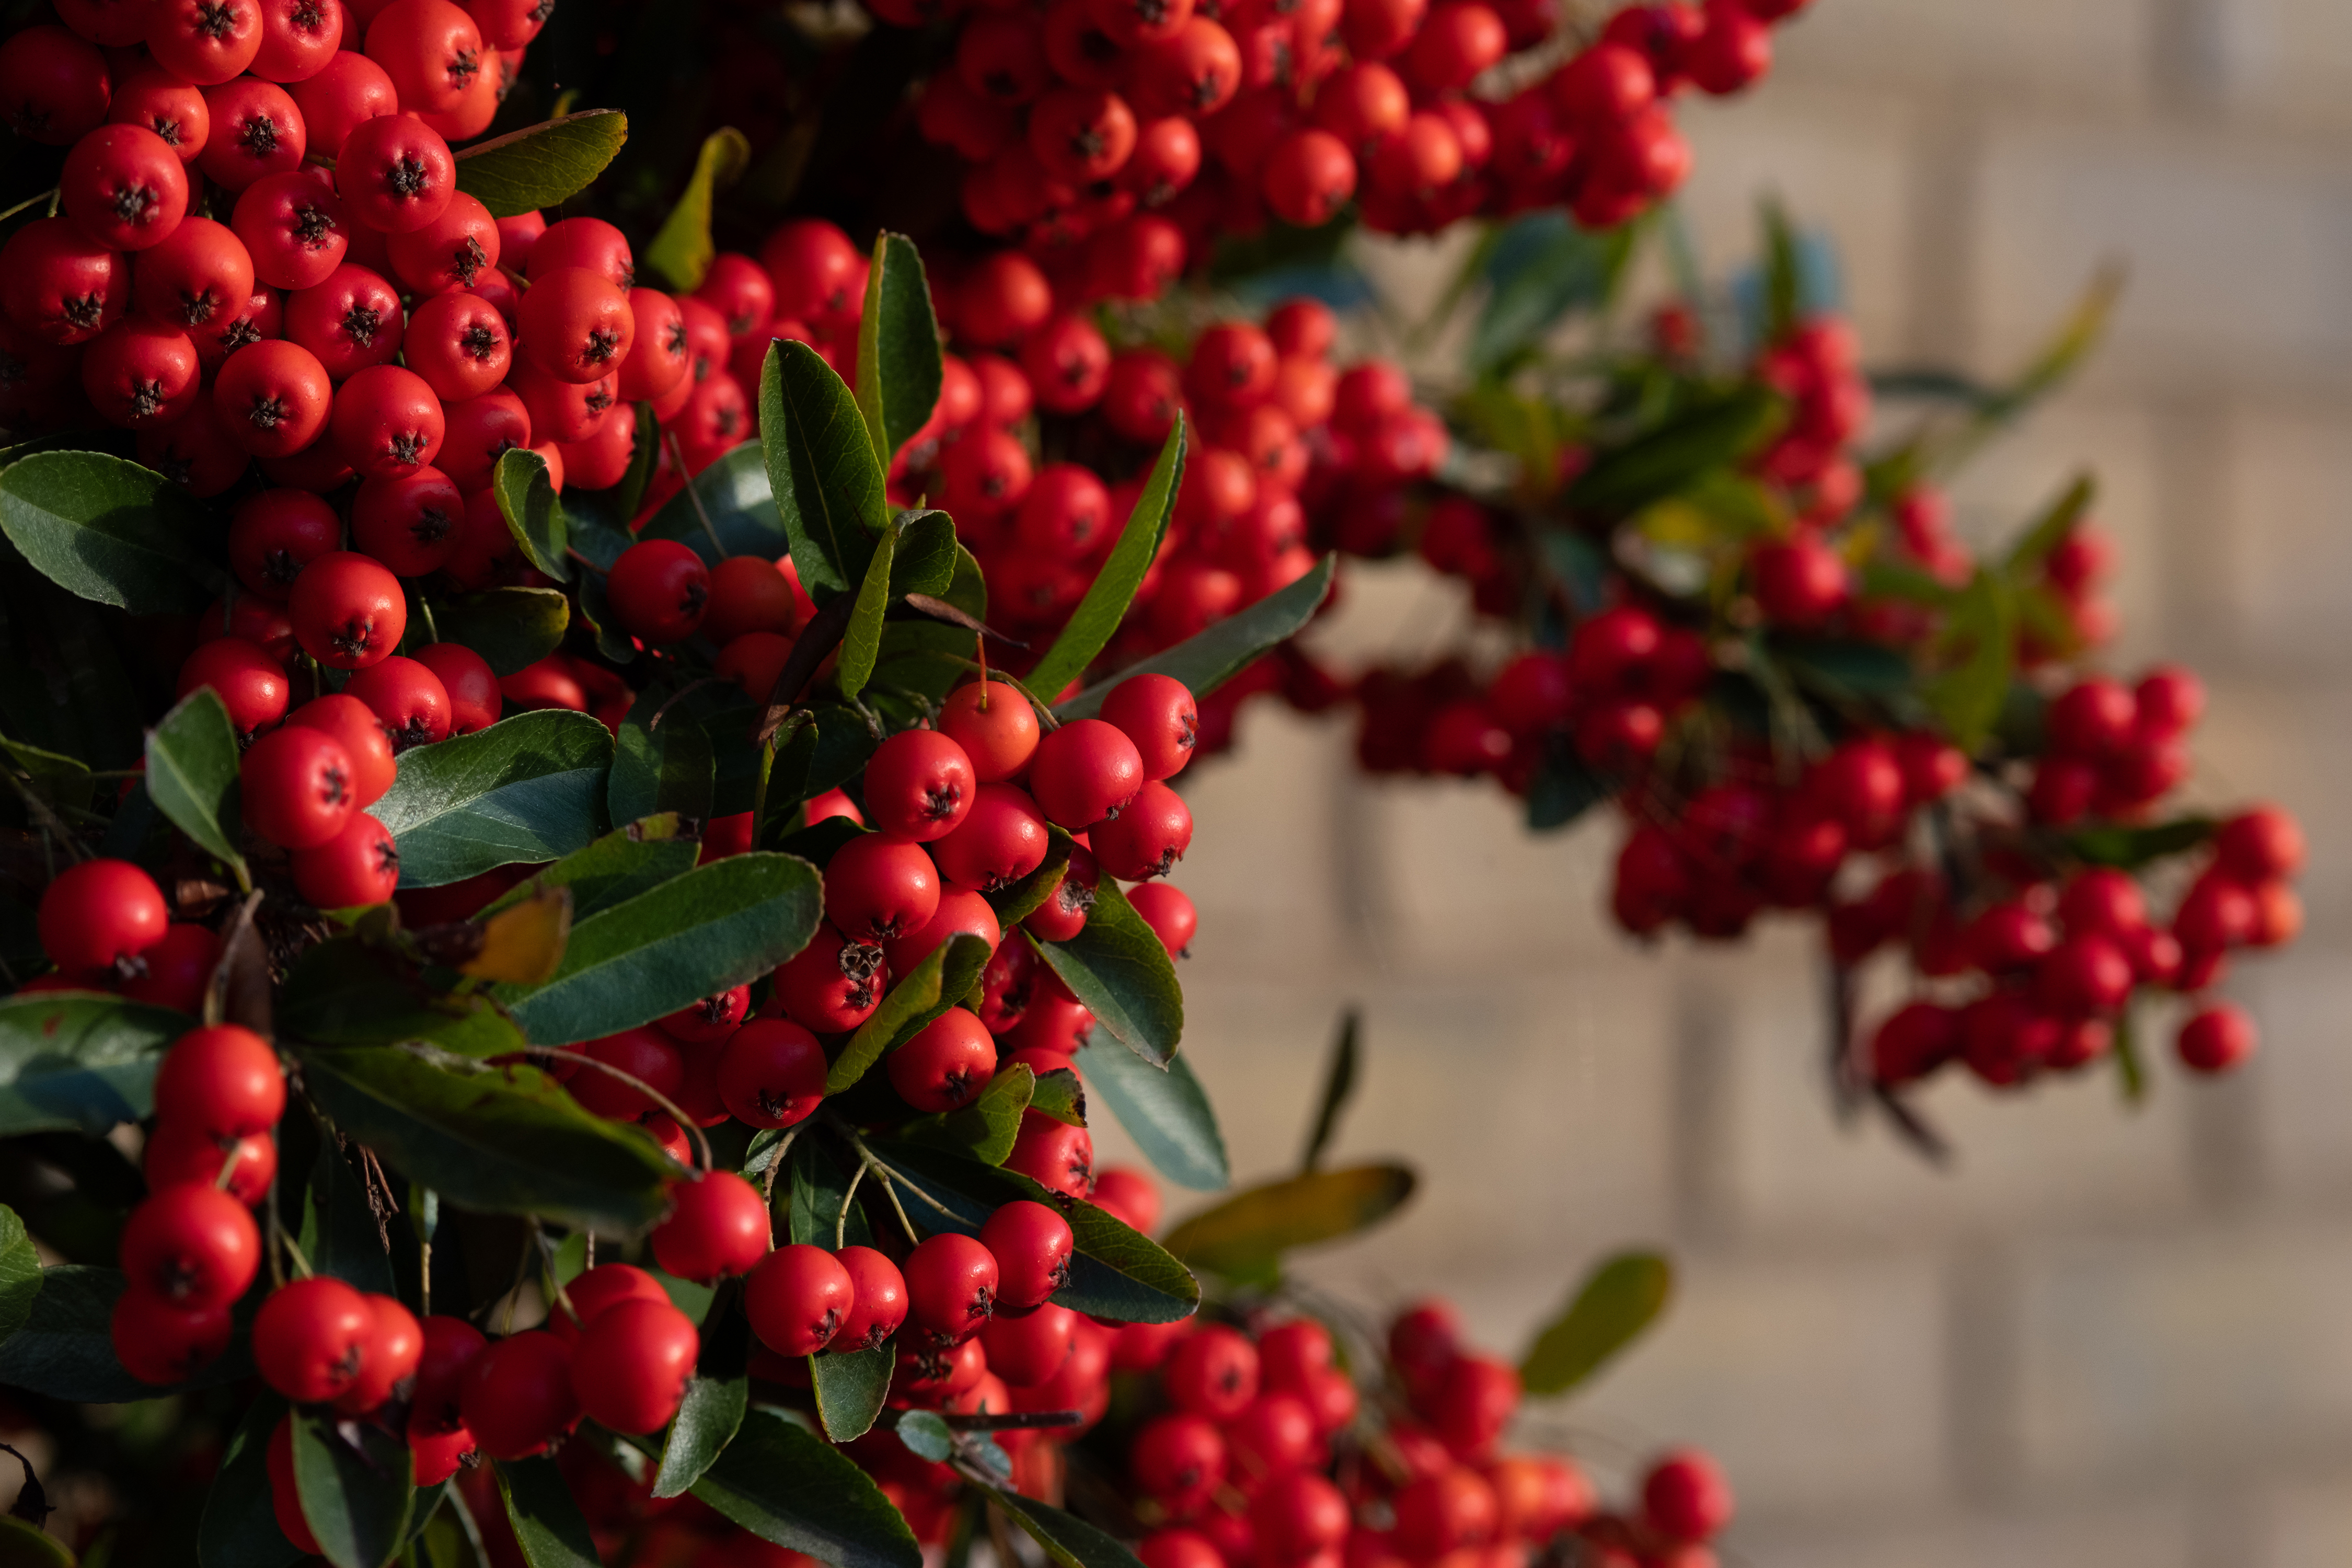 A collection of red berries in autumn light